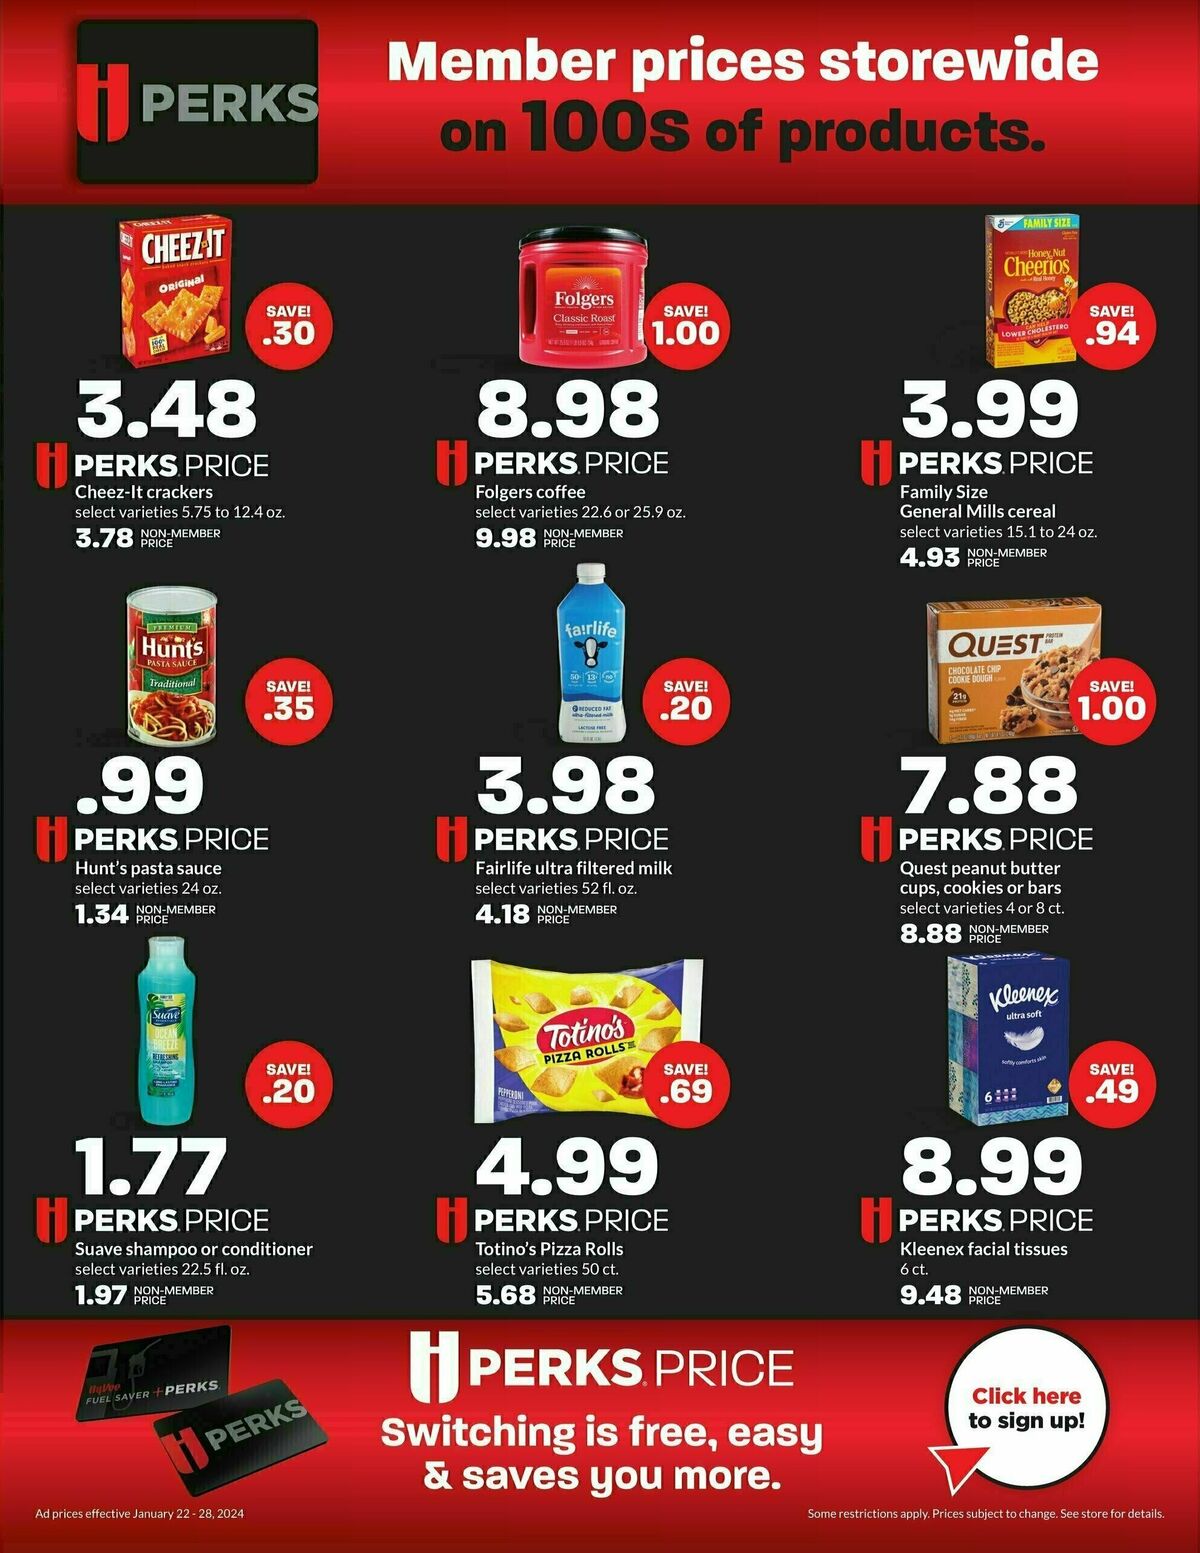 Hy-Vee Weekly Ad from January 22